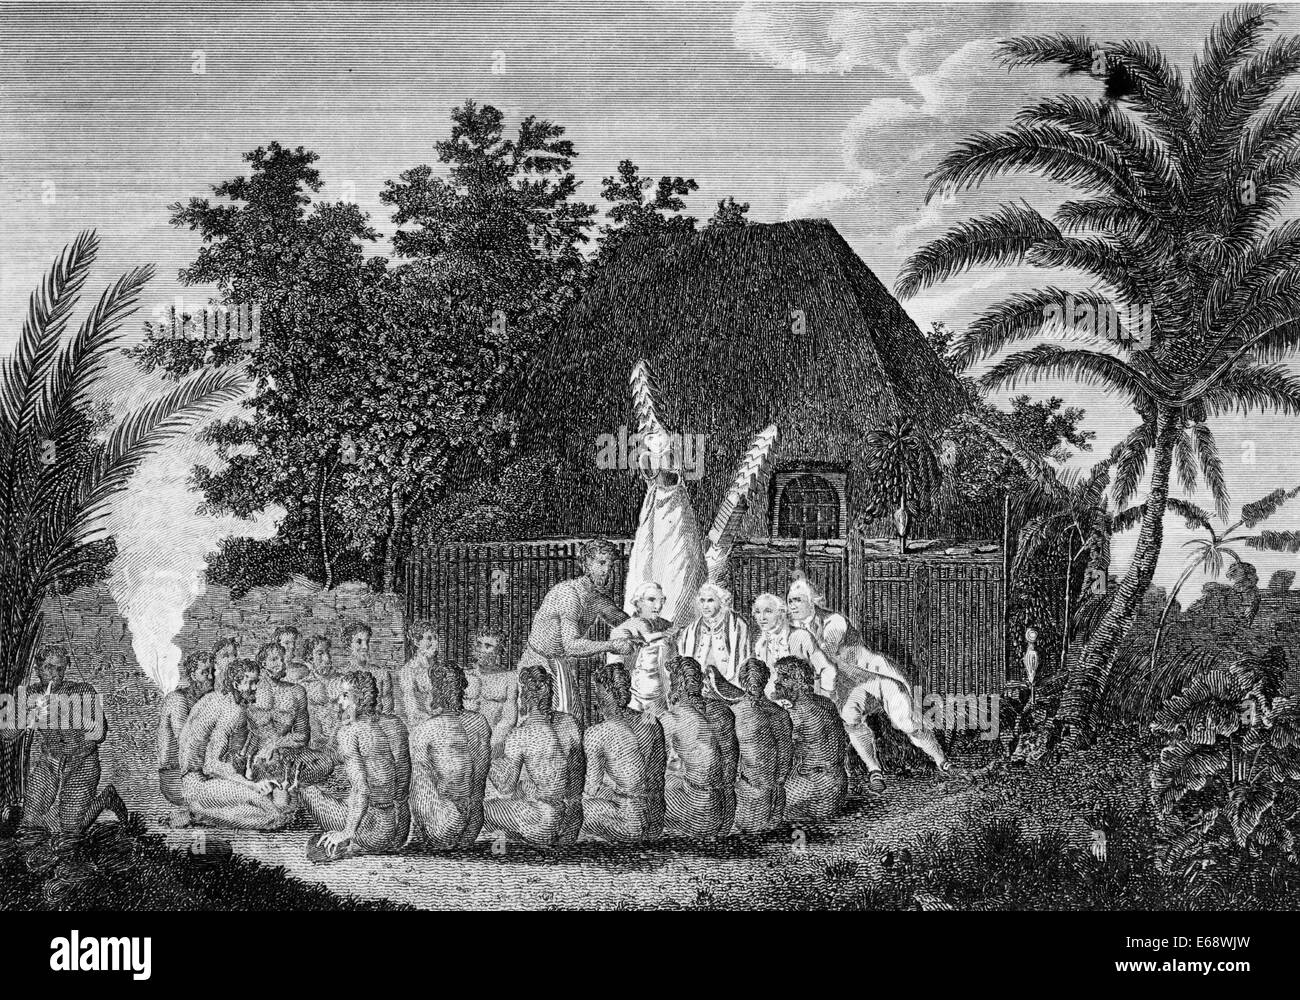 An Offering before Captain Cook in the Sandwich Islands - Captain James Cook and four of his men with natives, Hawaii, 1770 Stock Photo